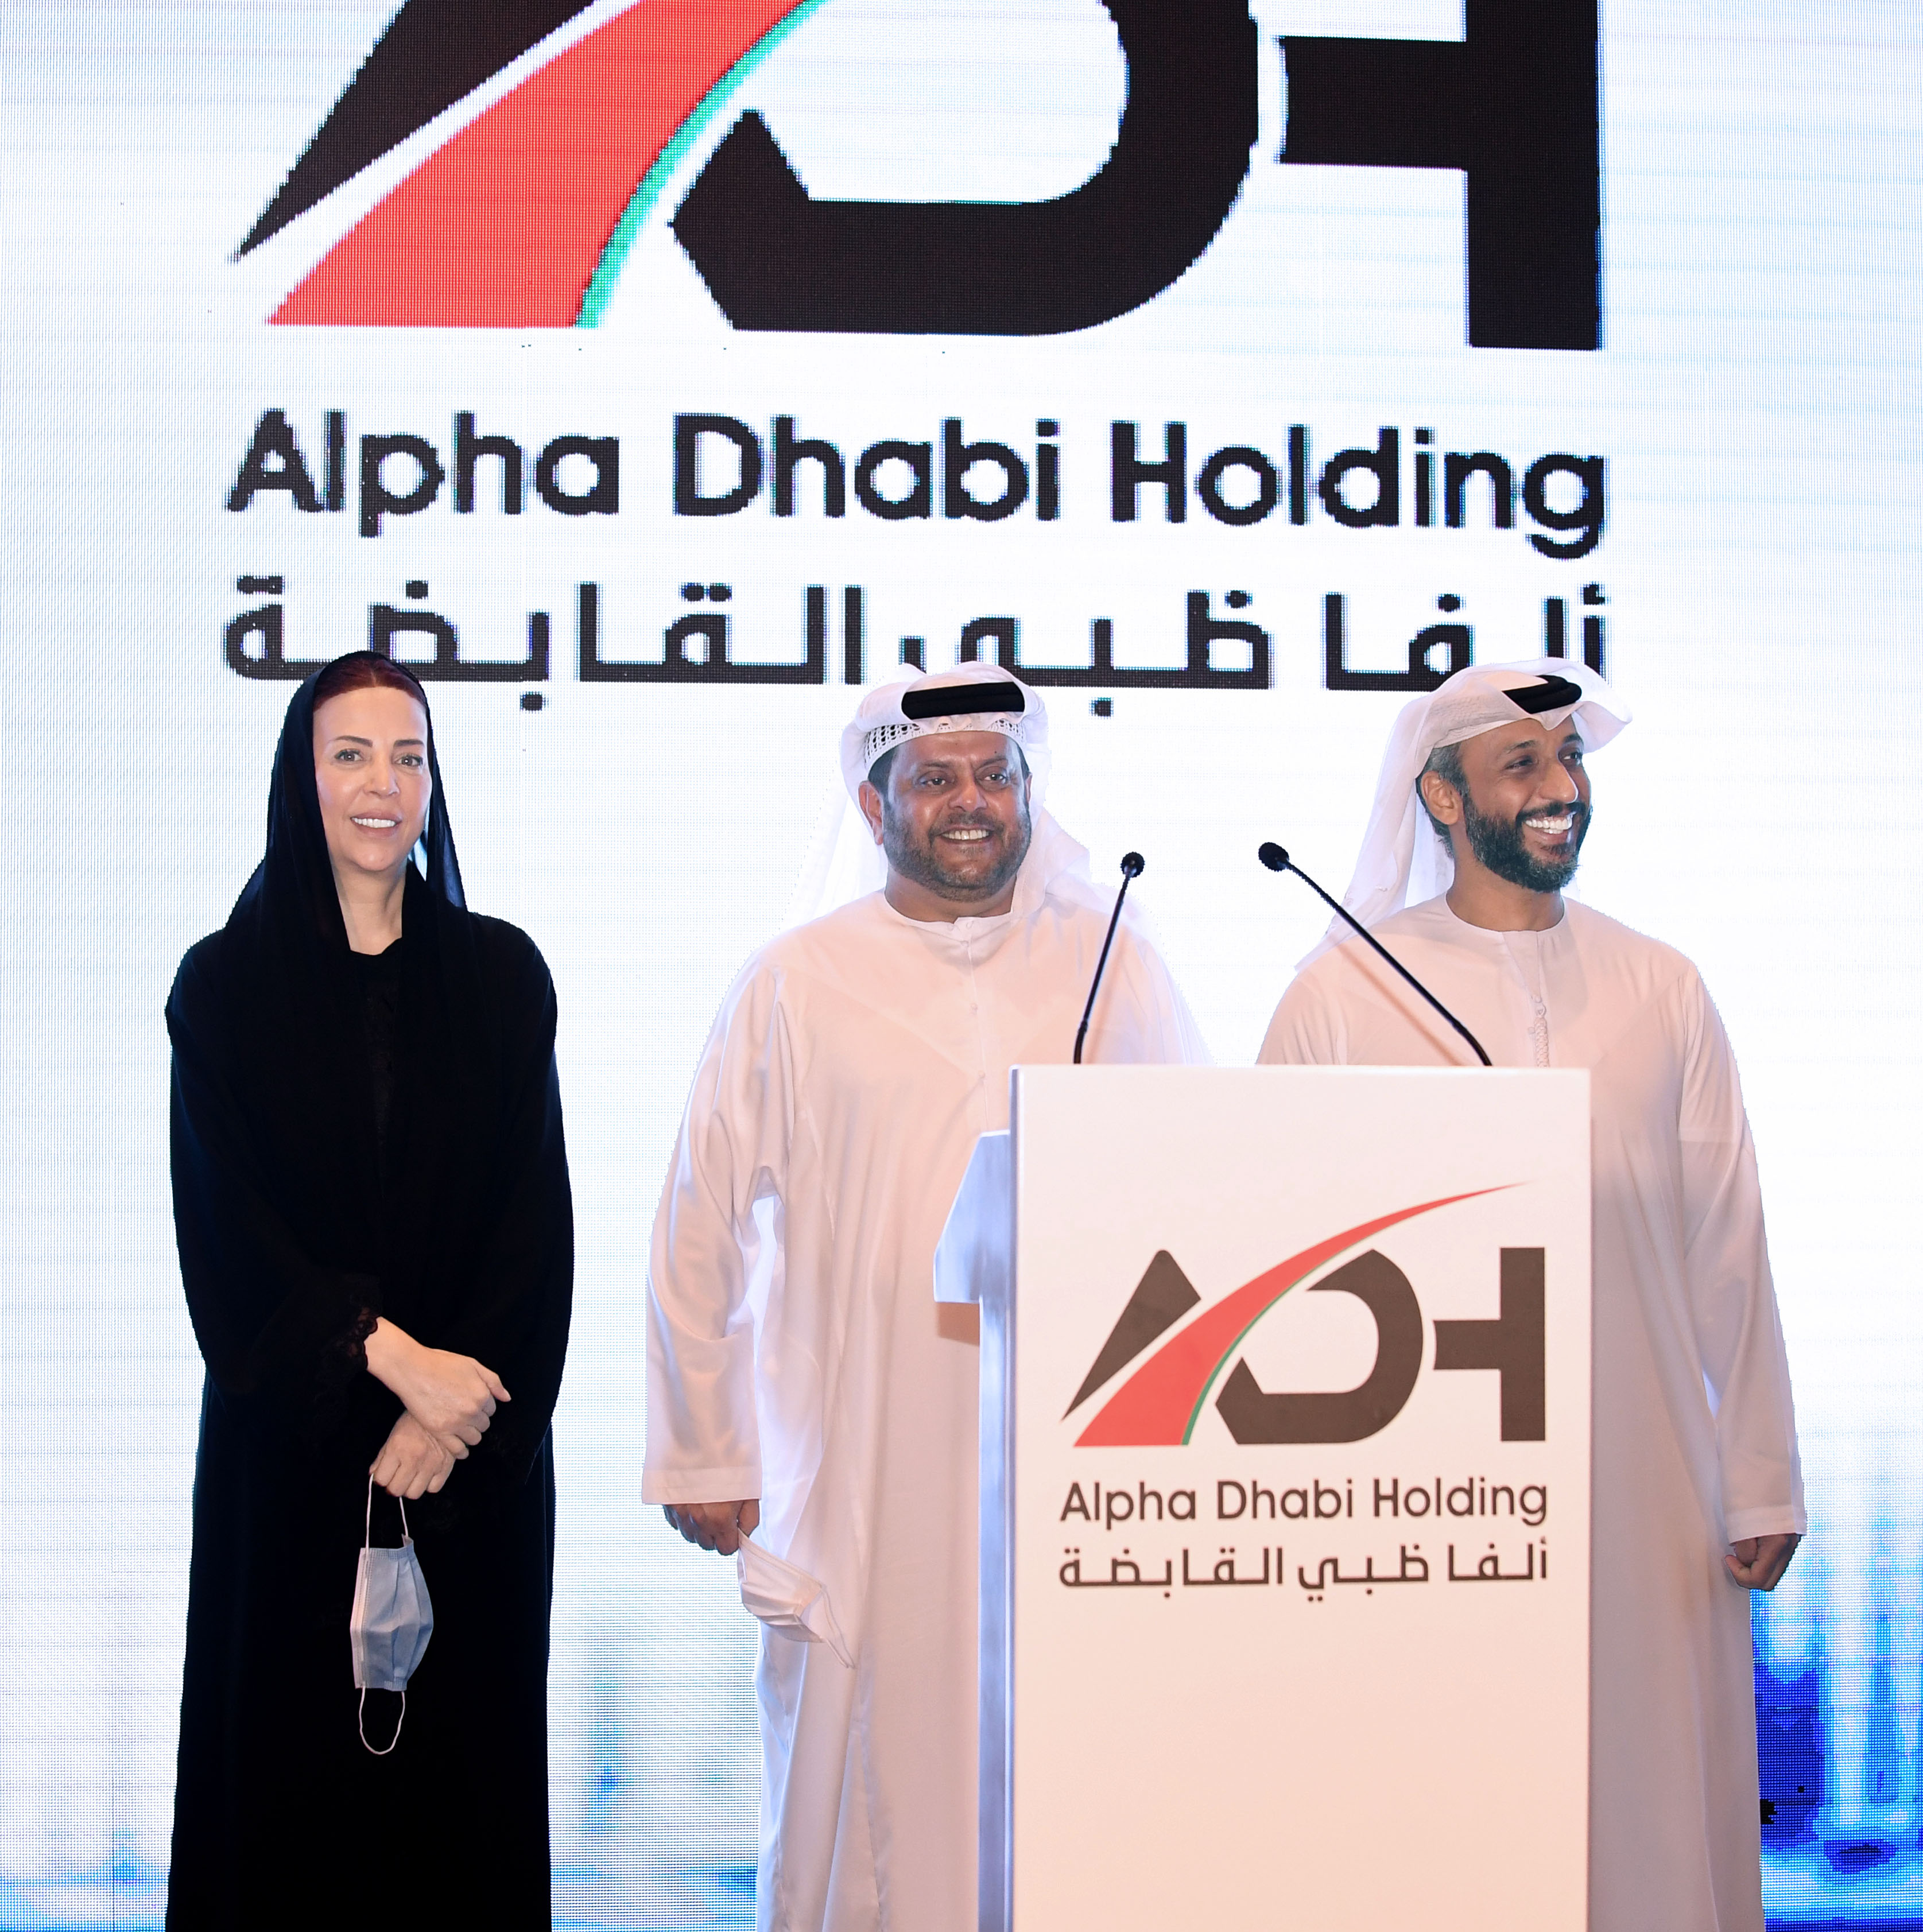 IHC’s Subsidiary Alpha Dhabi Holding Completes Listing On ADX